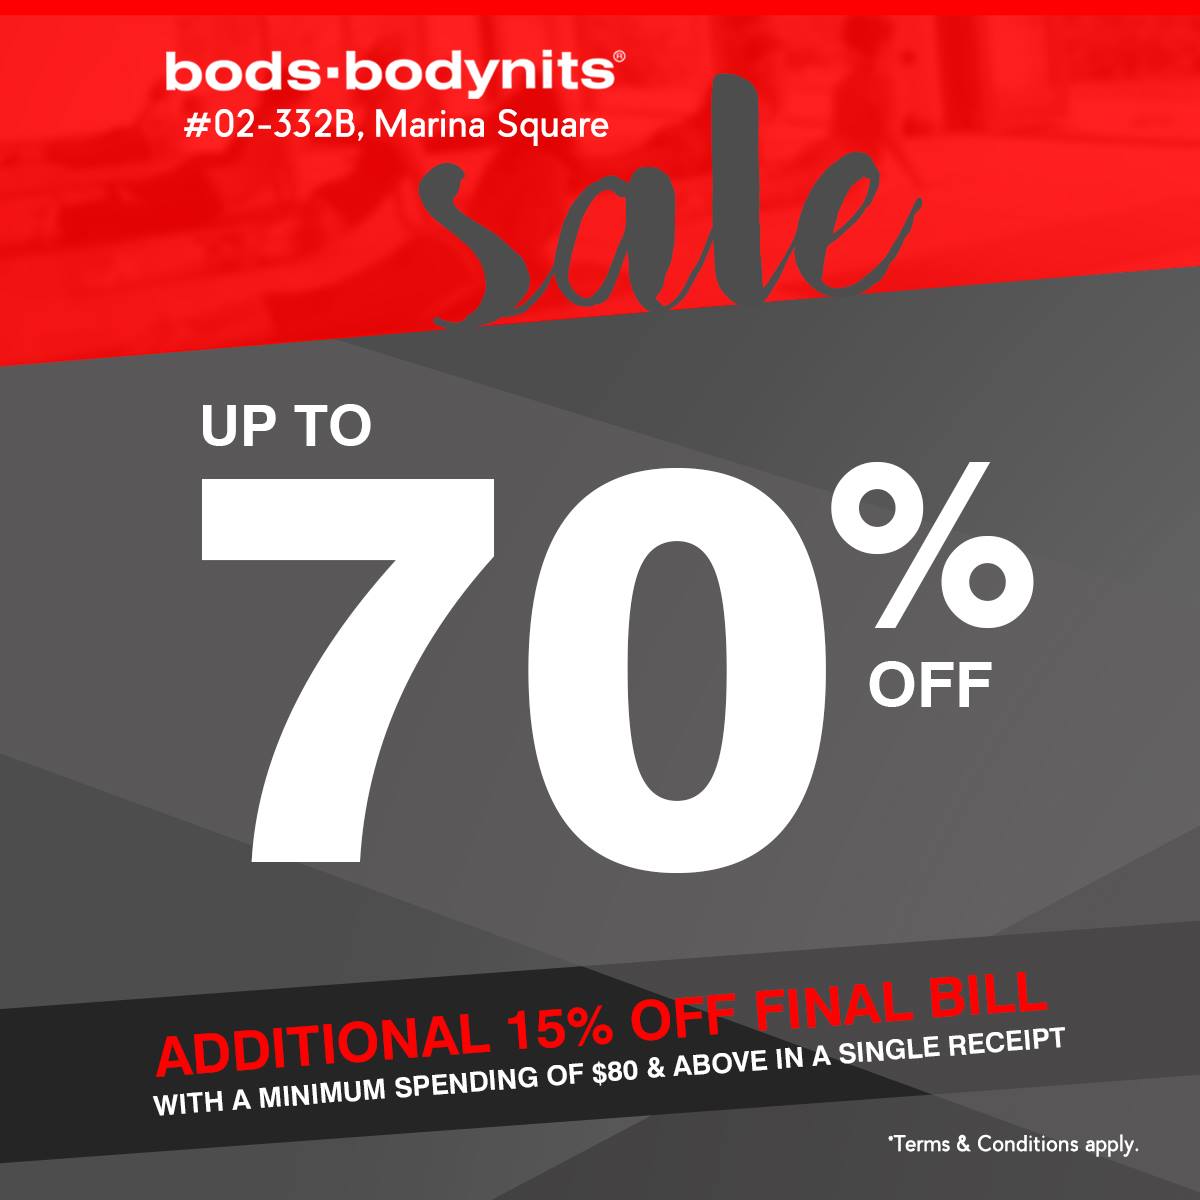 Marina Square Singapore bods.bodynits Sale Up to 70% Off Promotion ends 30 Sep 2016